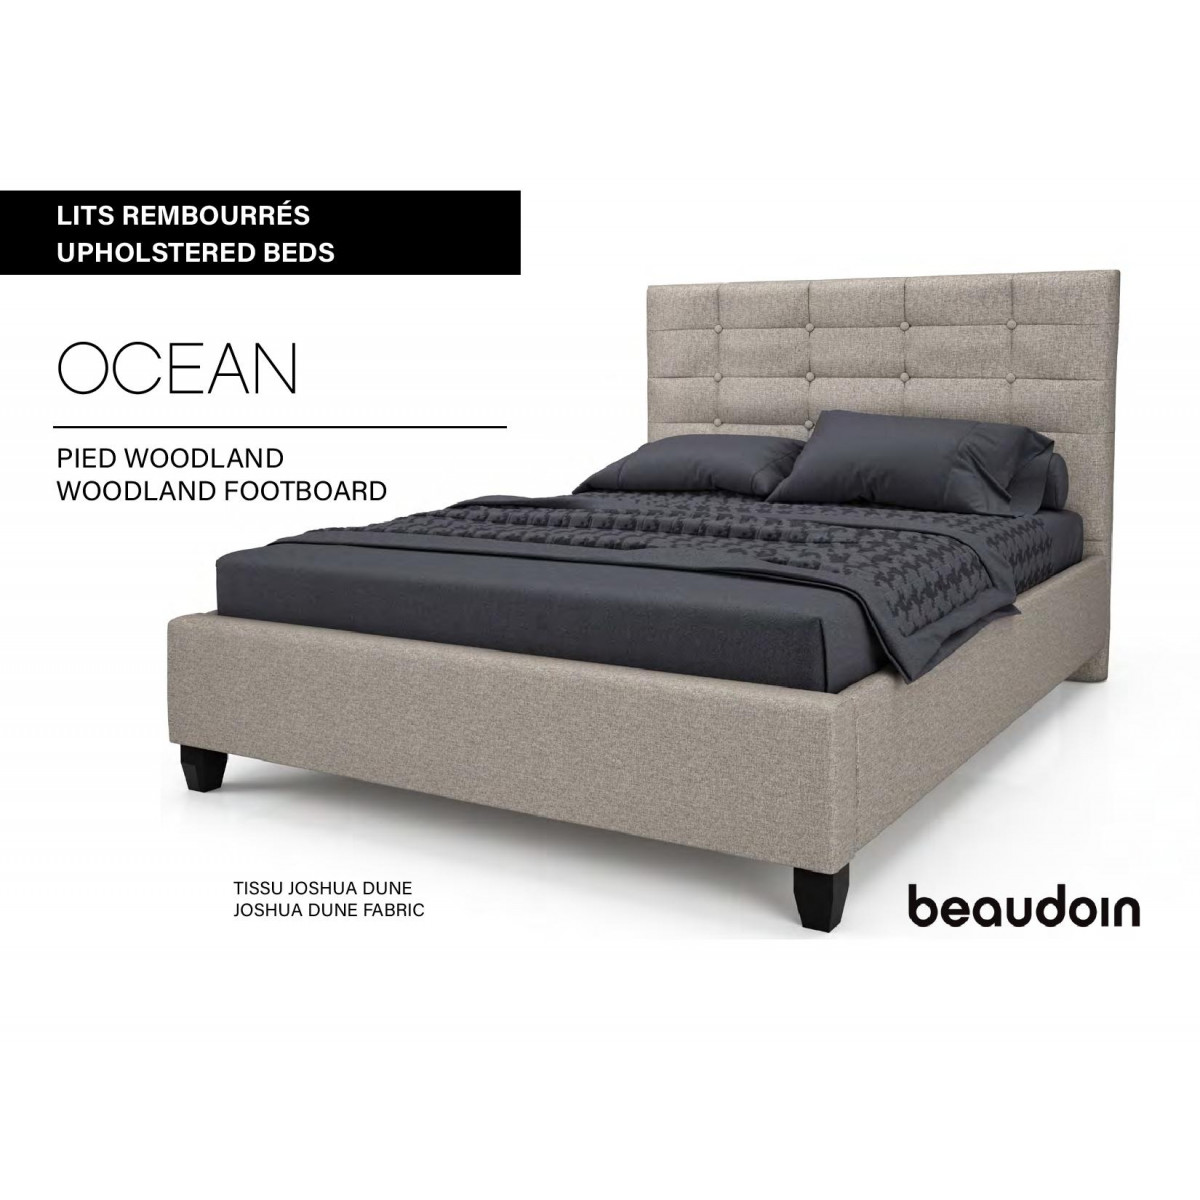 copy of Bed Beaudoin Ocean